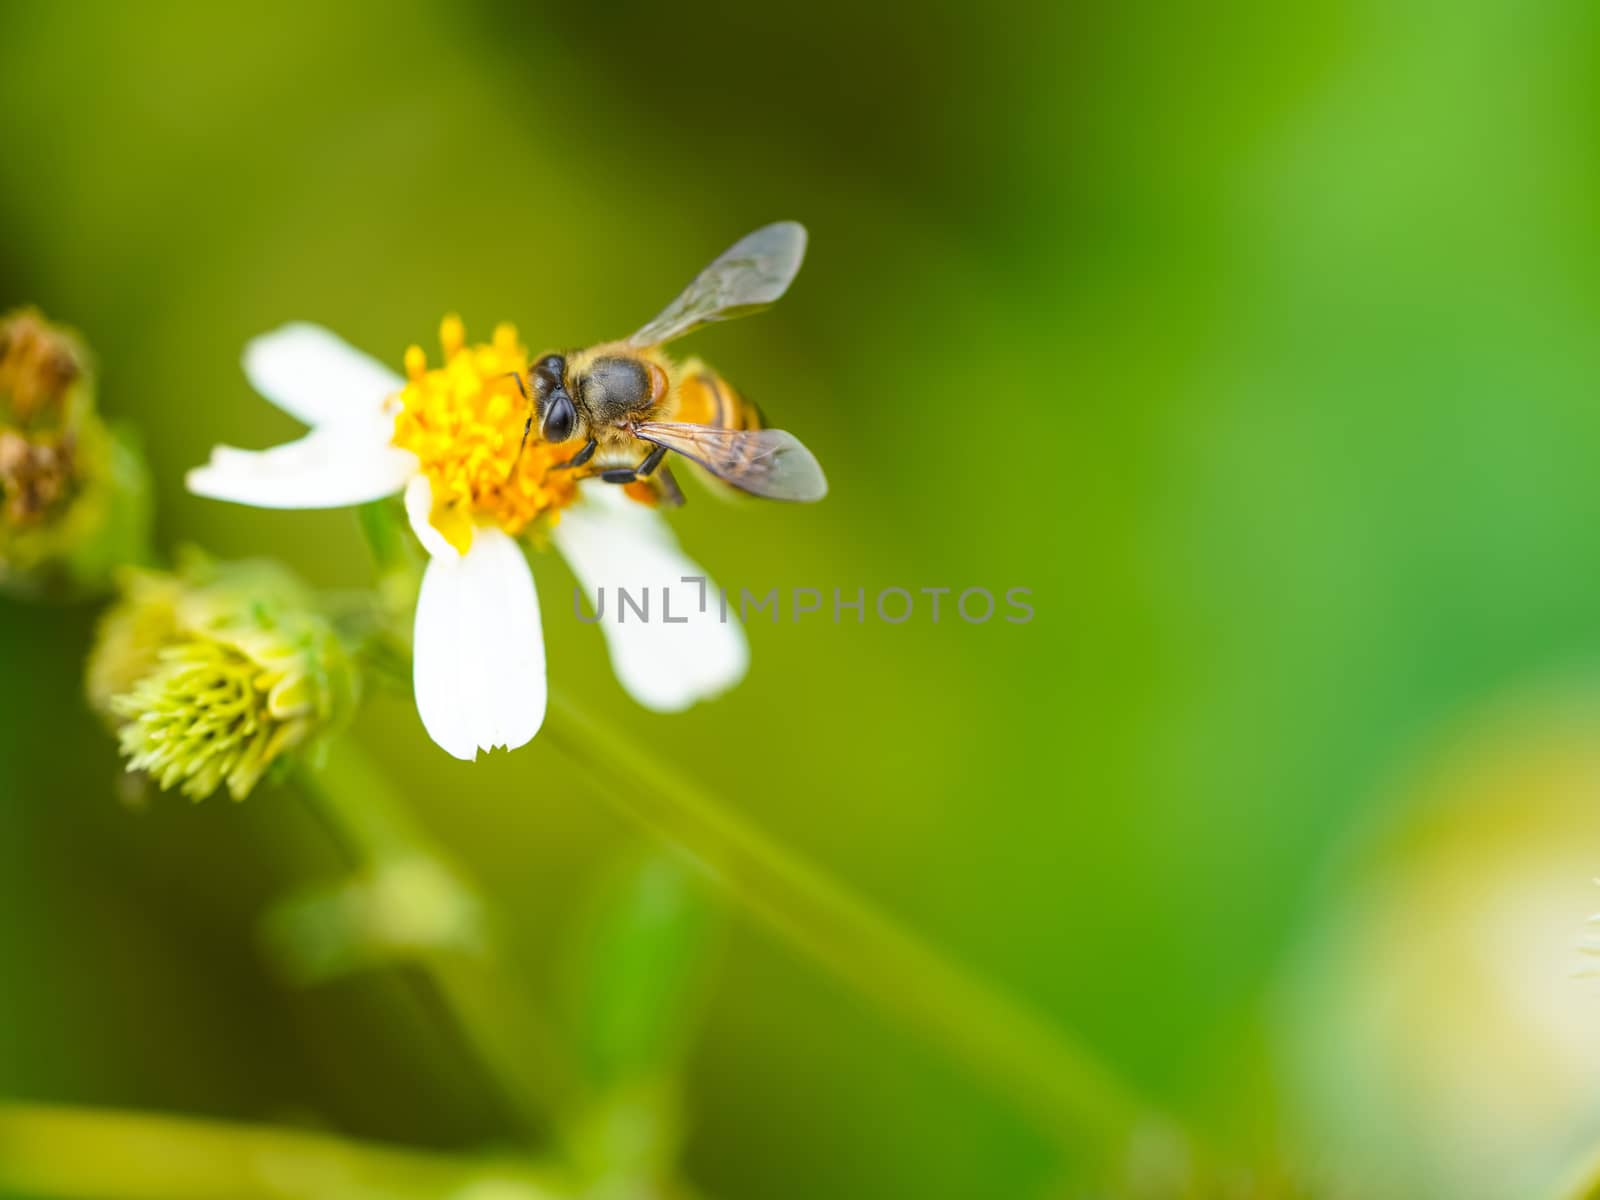 Closeup little bee pollenating a white flower. Greenery background with copy space, wallpaper concept.